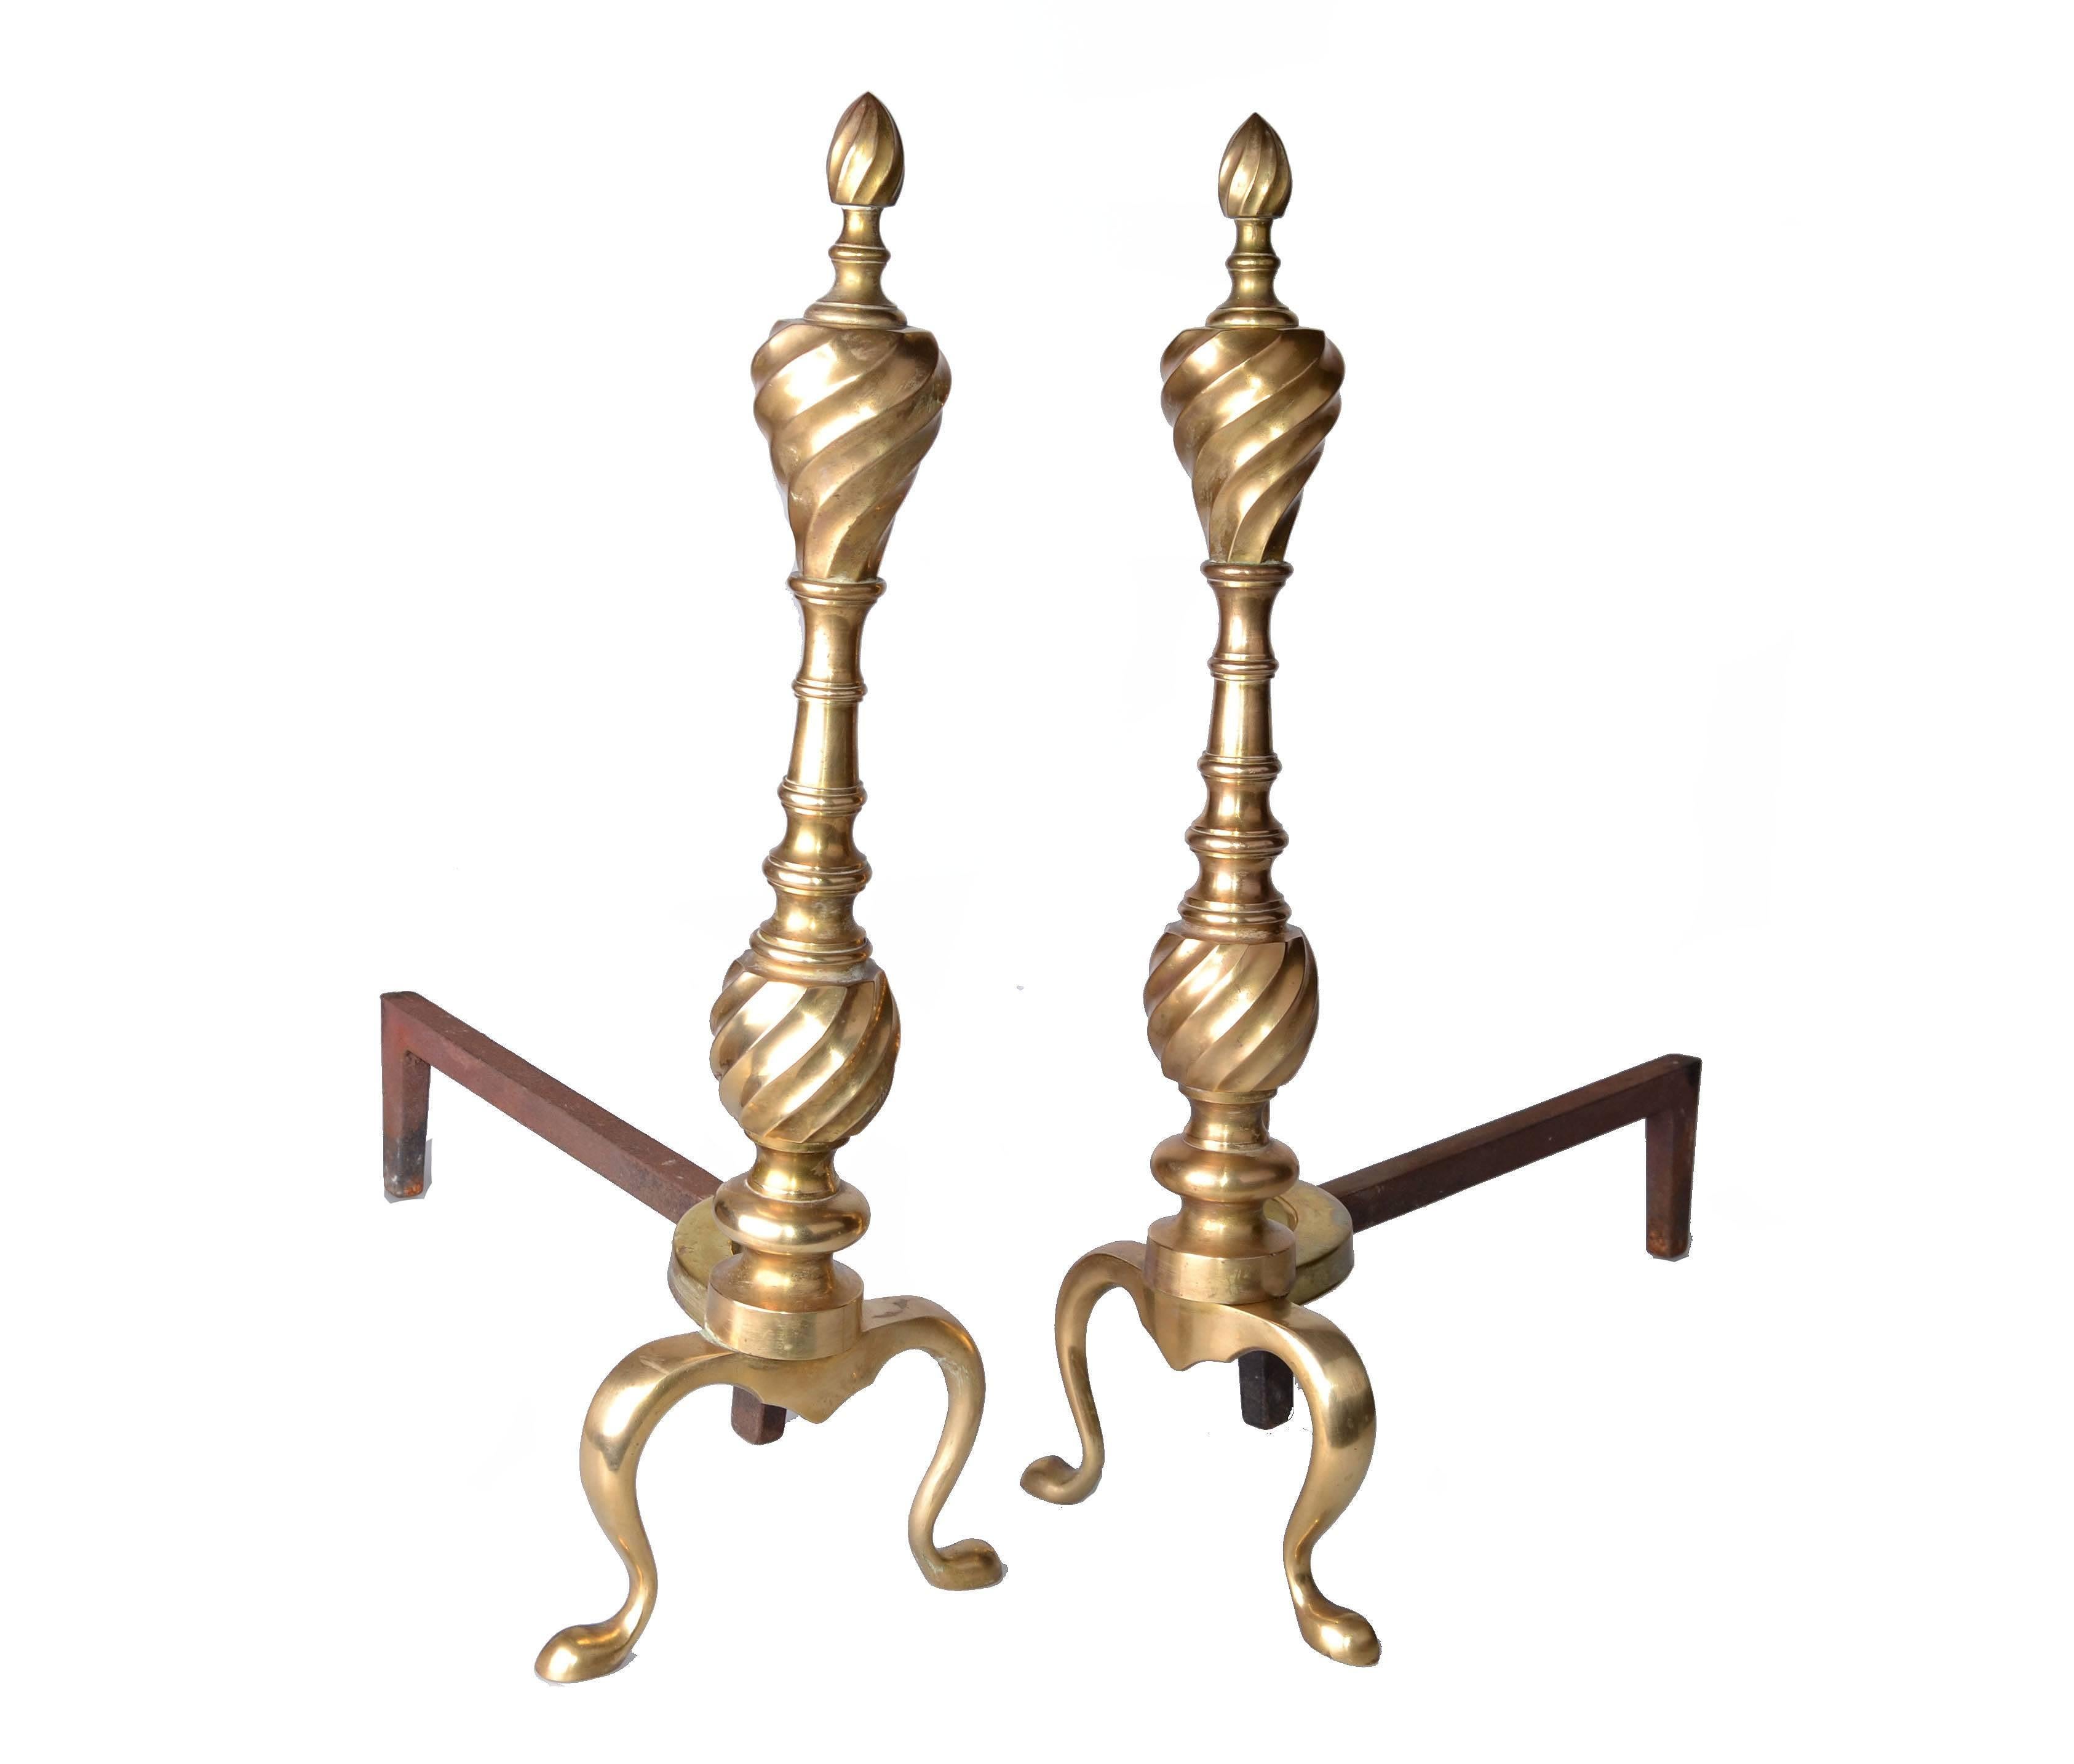 Hollywood Regency Pair of Solid Brass Andirons